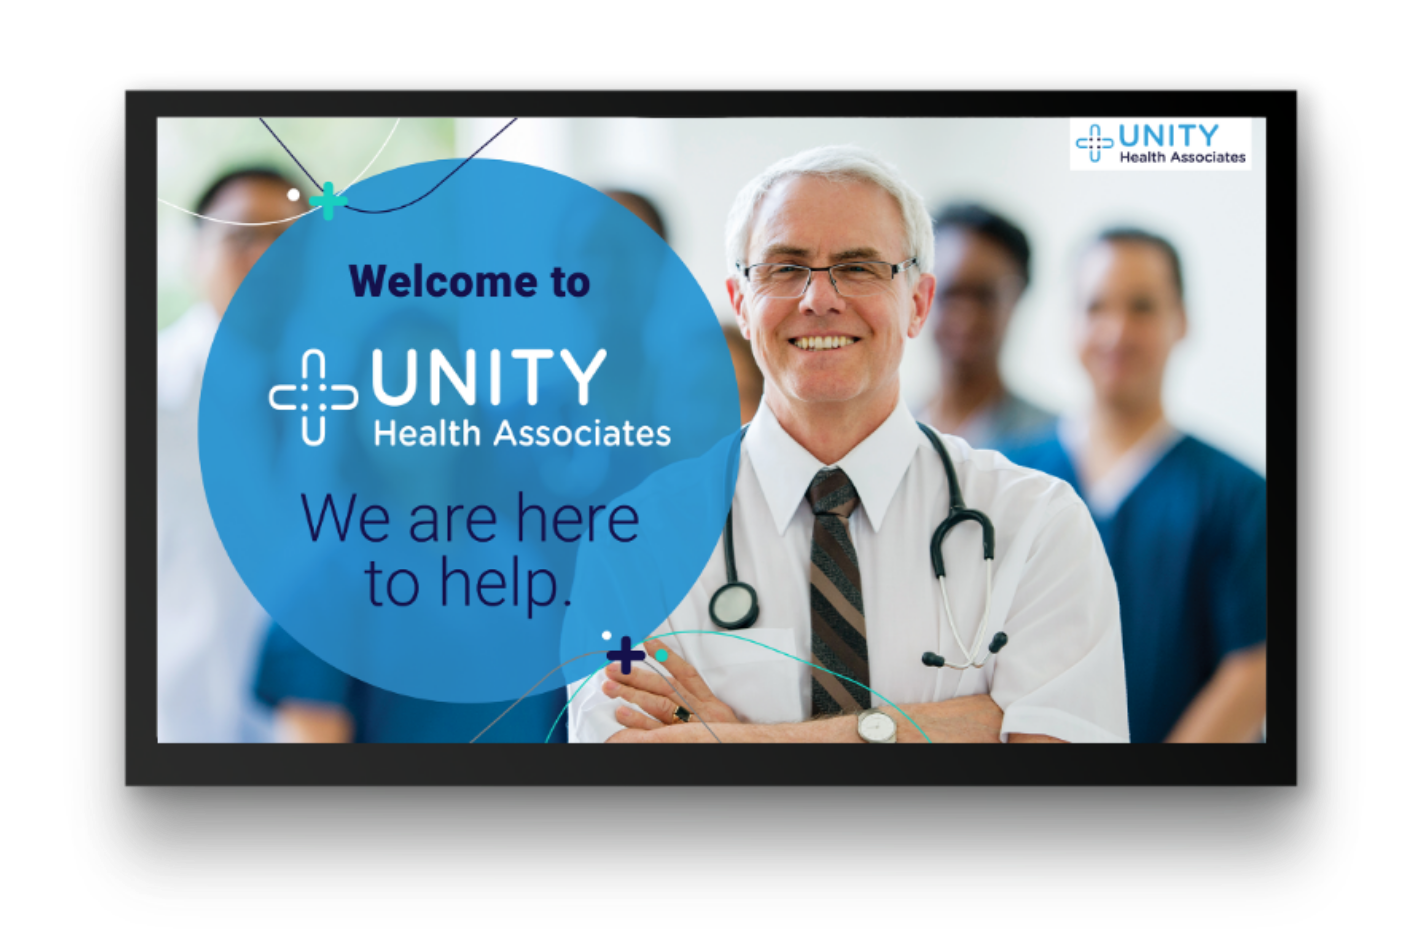 PatientPoint digital waiting room screen showing a smiling doctor next to a hospital welcome message.